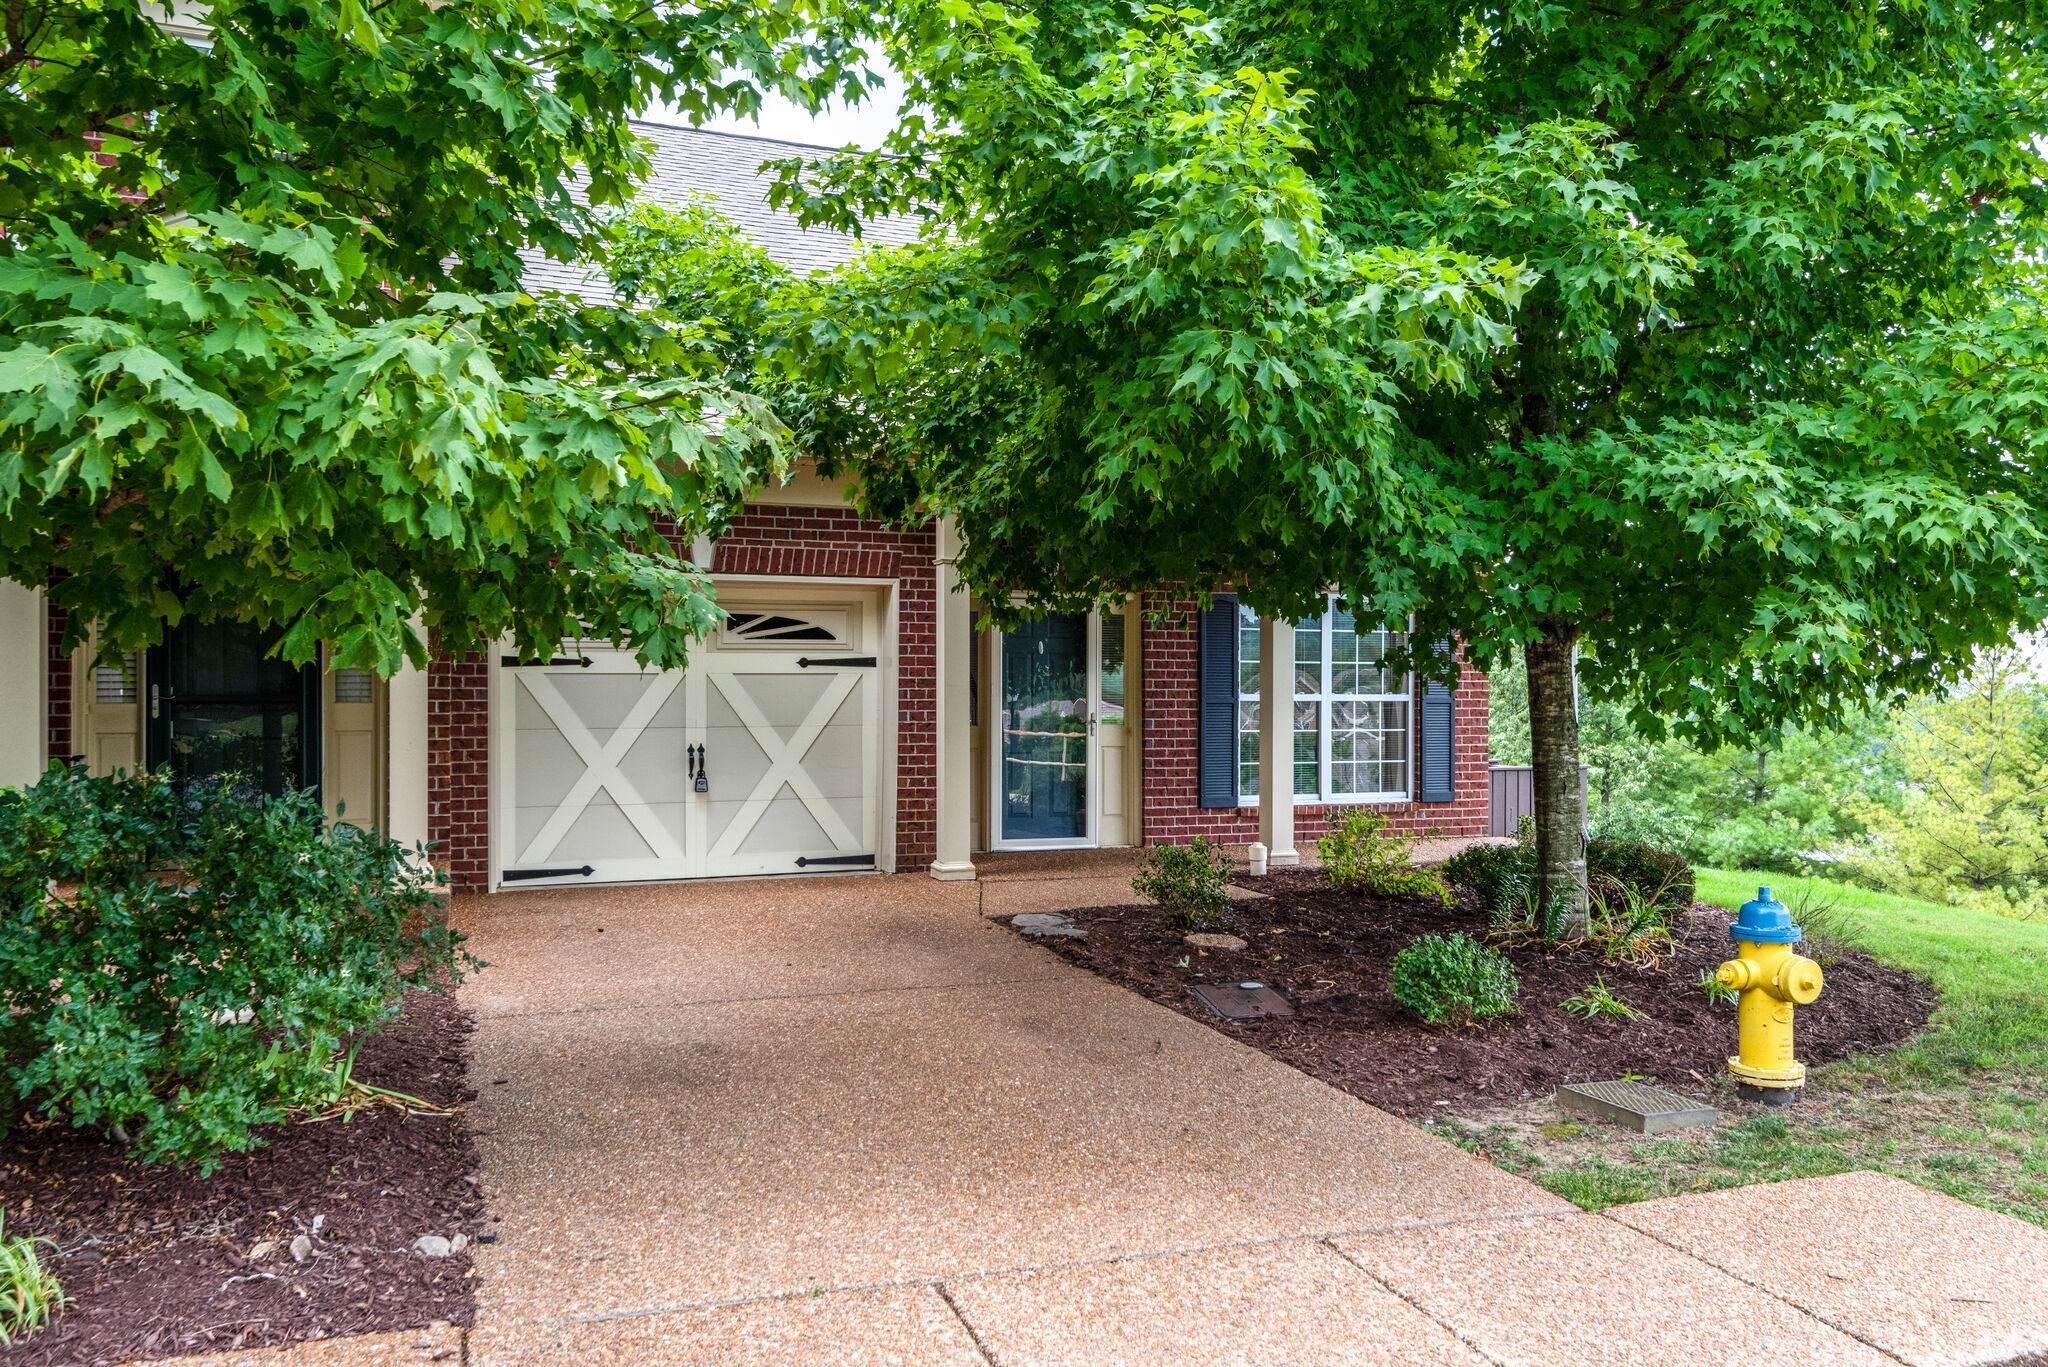 Townhouse at 1813 Brentwood Pointe Franklin, Tennessee 37067 United States